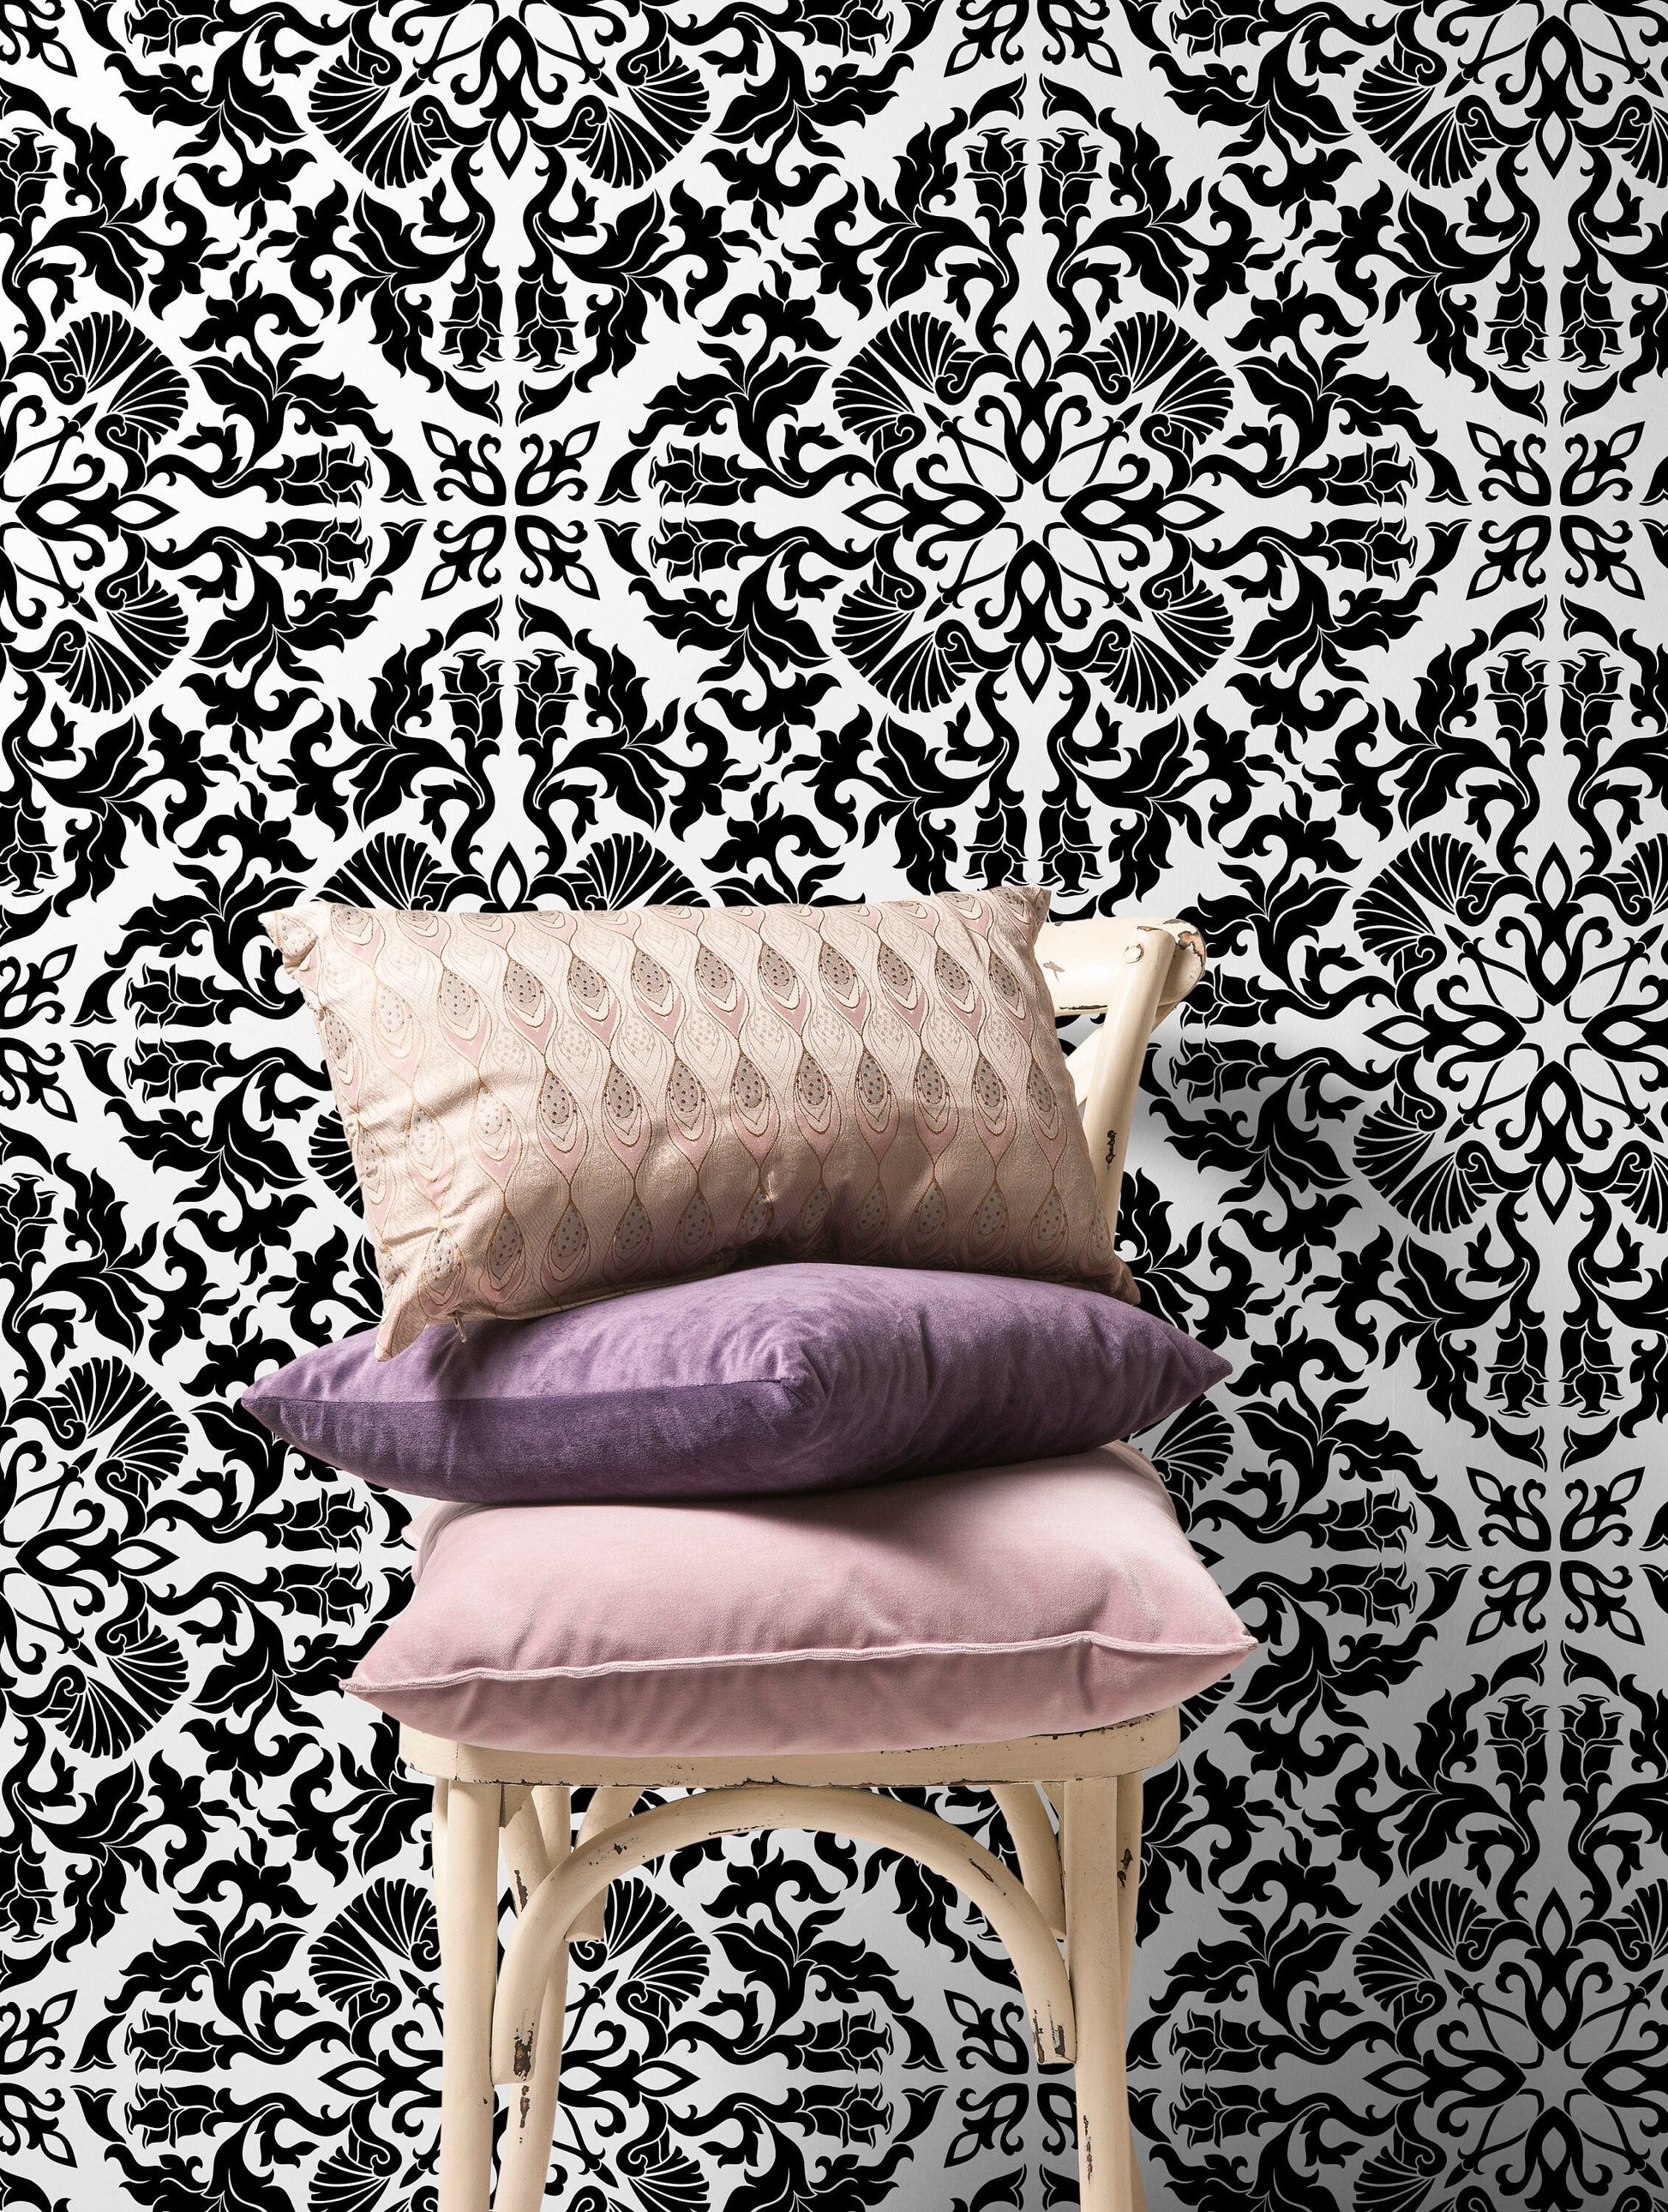 Removable Wallpaper Temporary Wallpaper Wallpaper Peel and Stick Wallpaper Wall Paper - A226